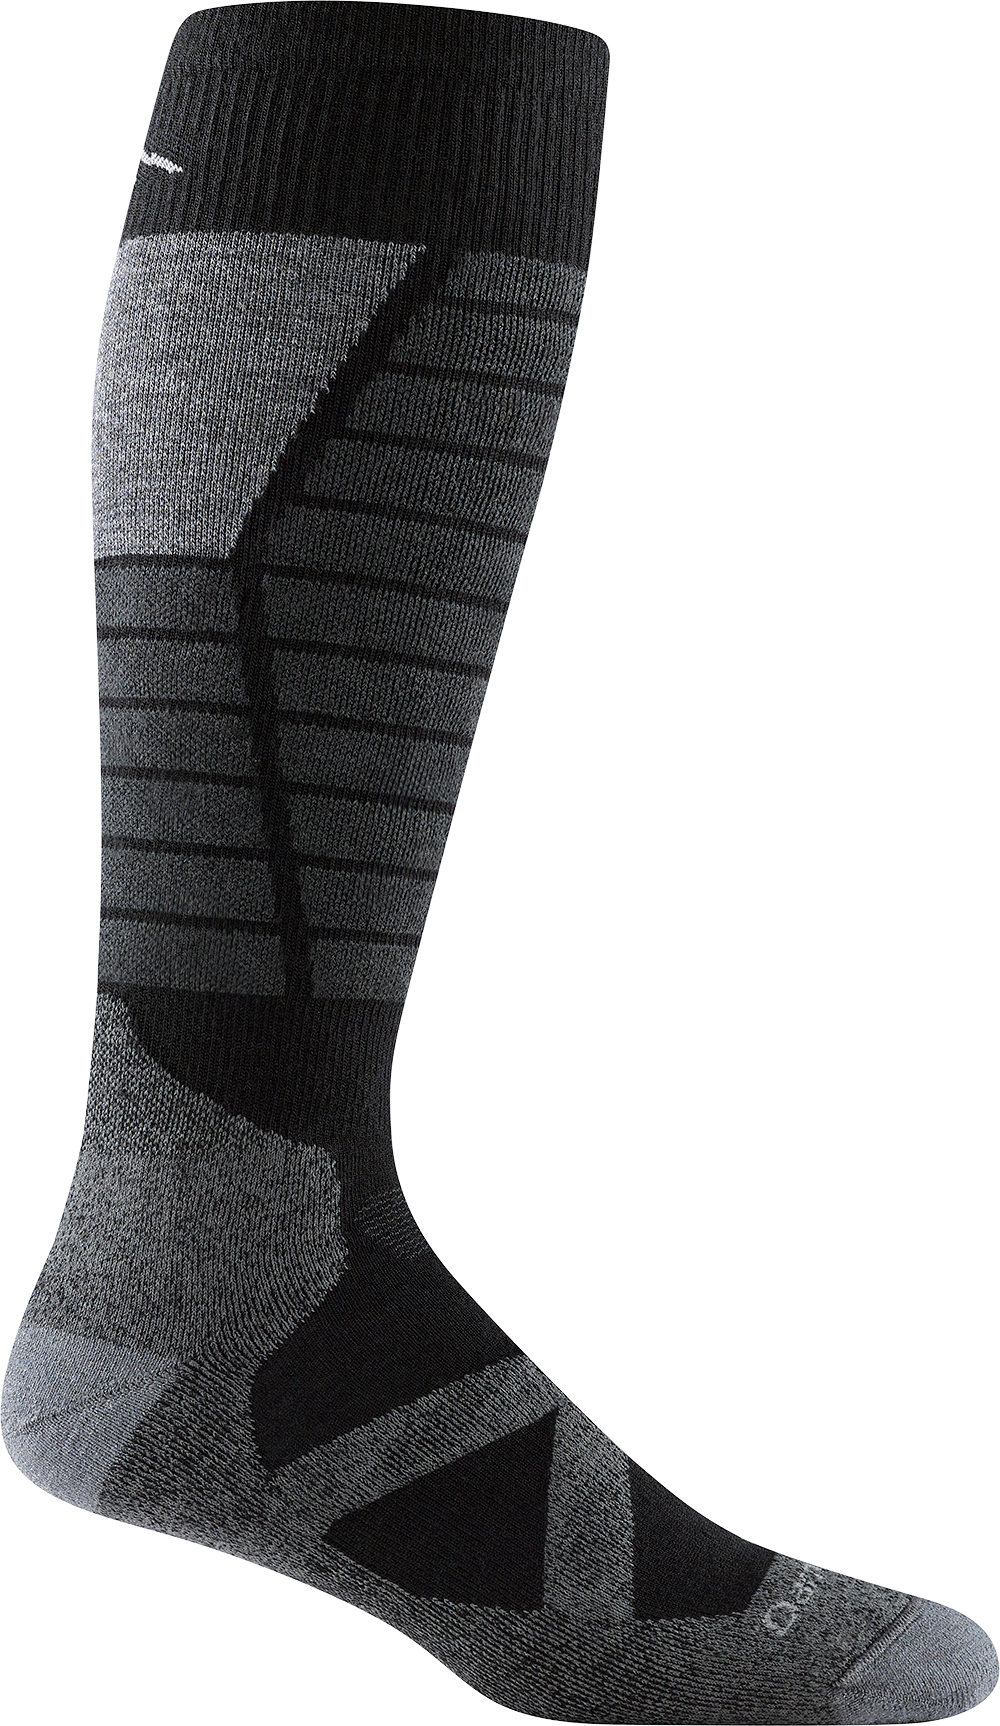 Men’s Function X Over-the-Calf Midweight Sock with Cushion Black